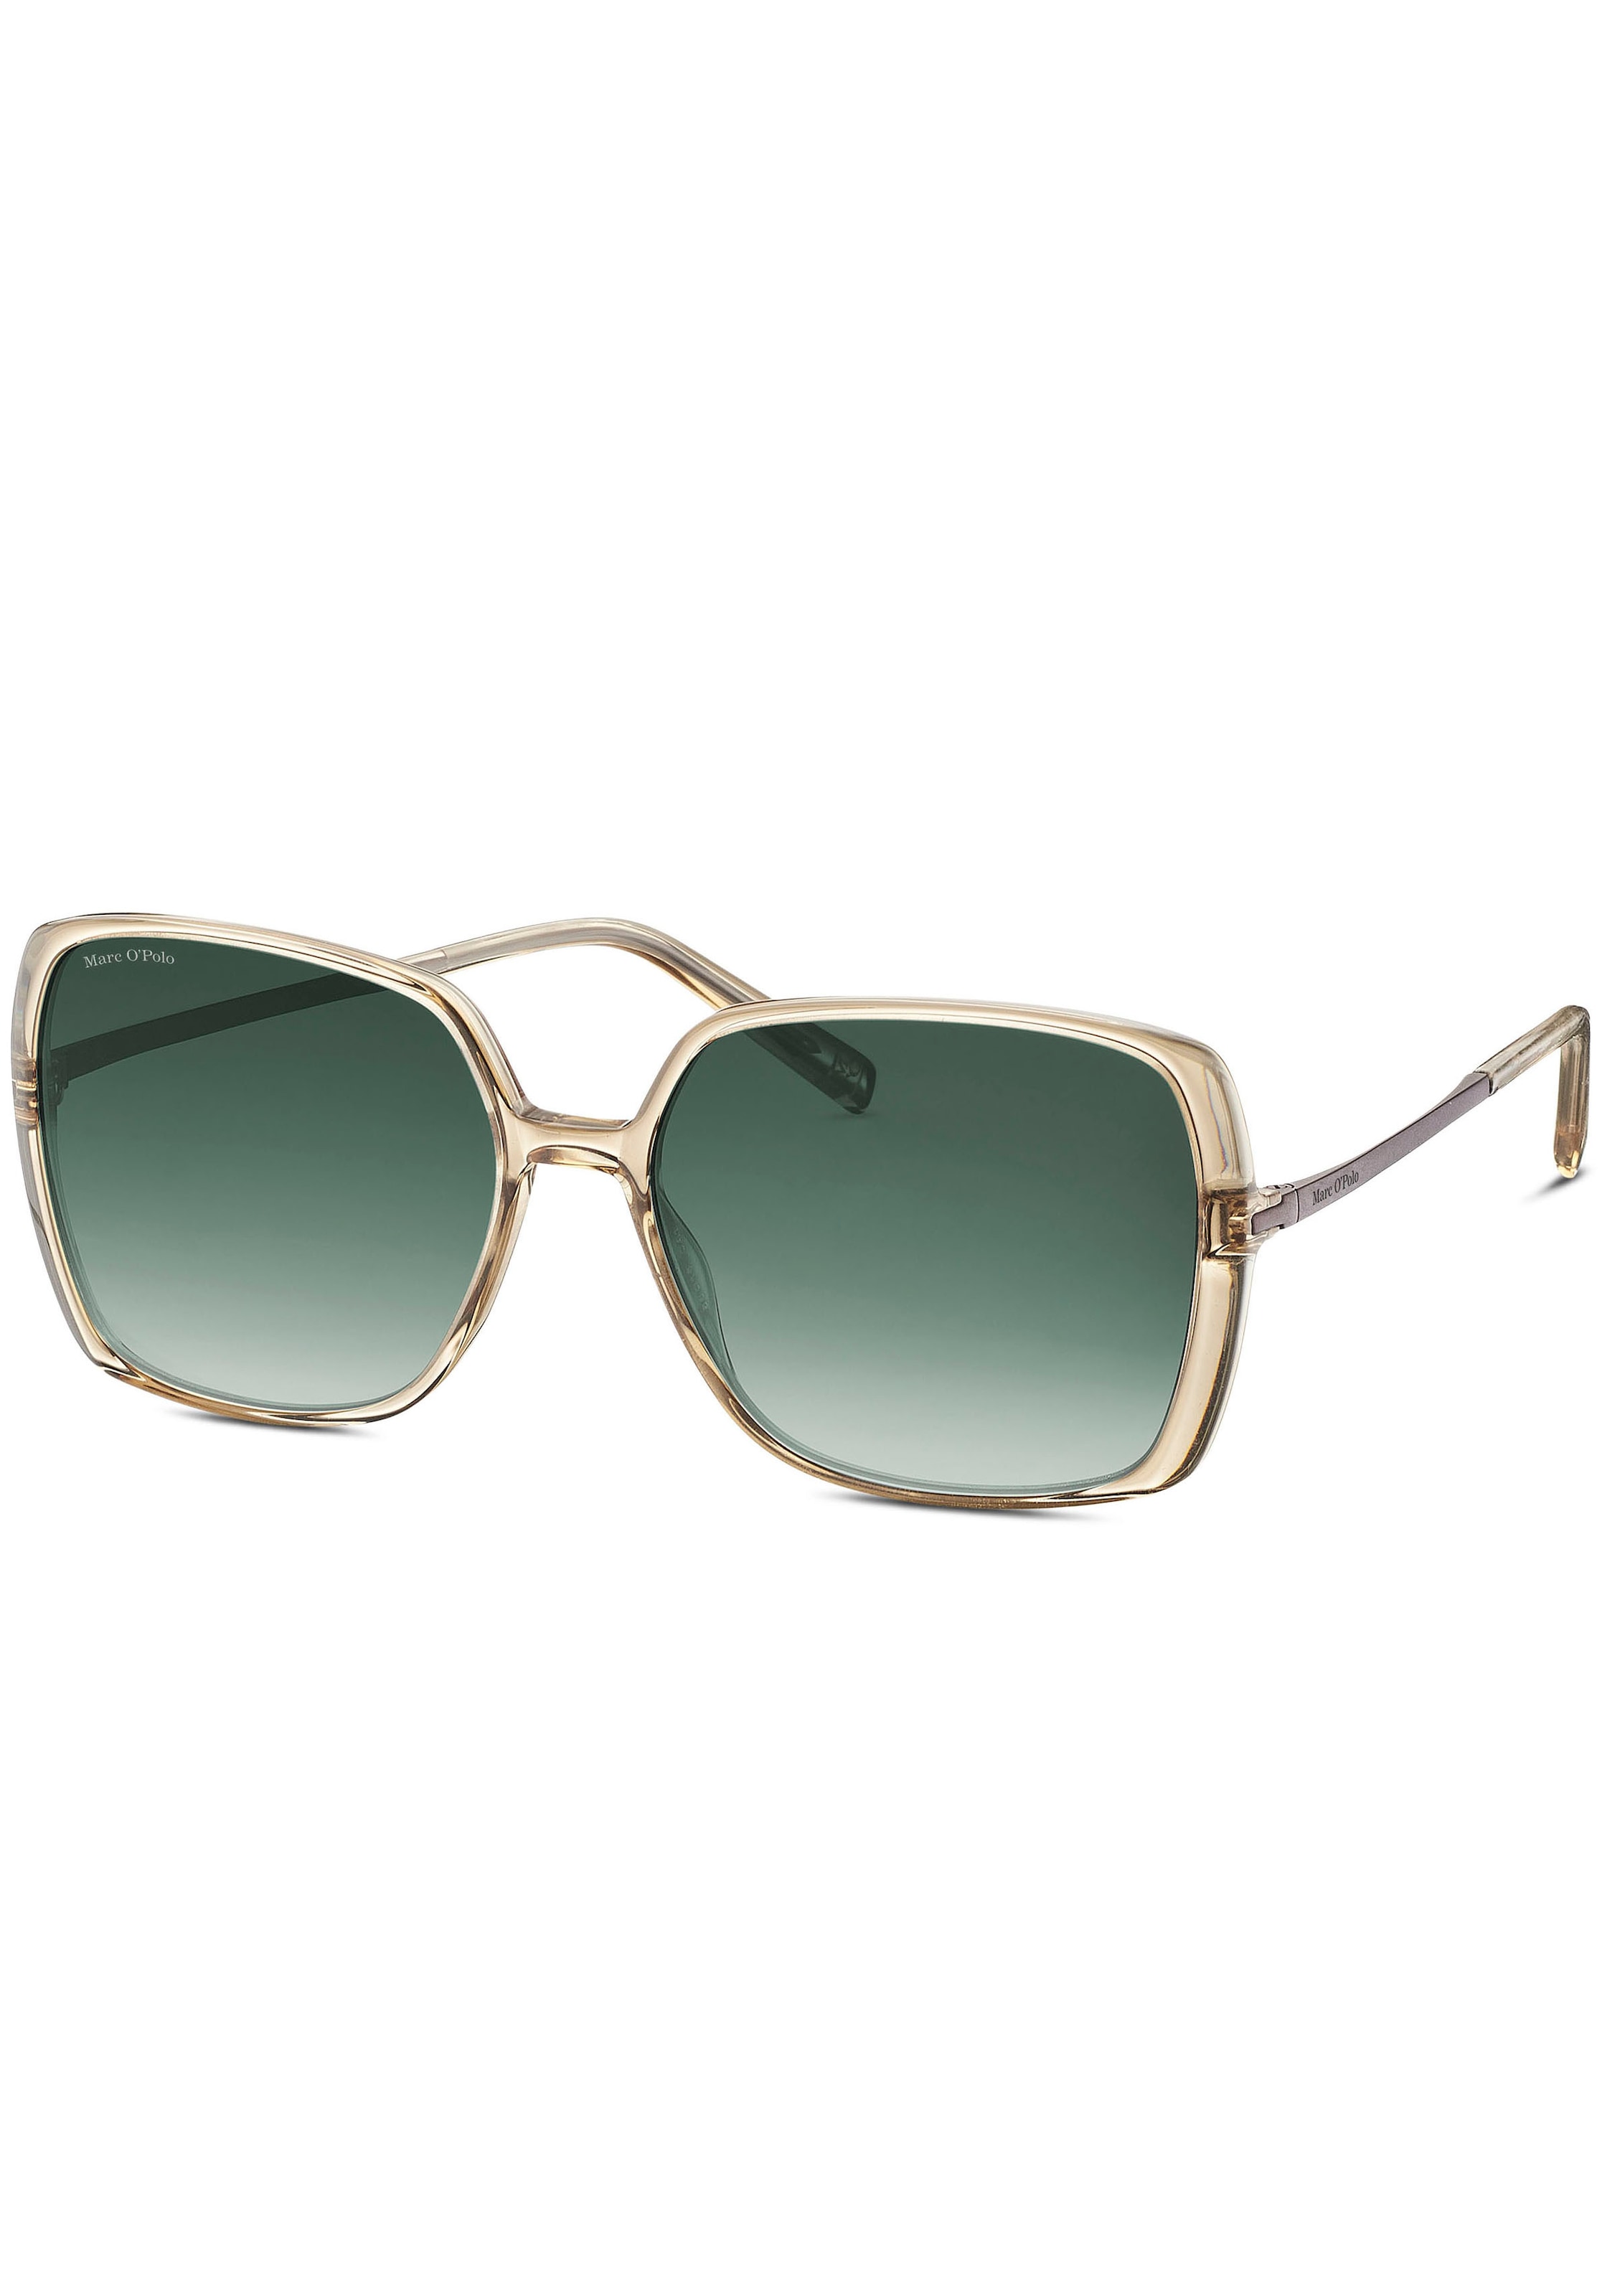 Marc O'Polo Sonnenbrille »Modell 506190«, Karree-From bei